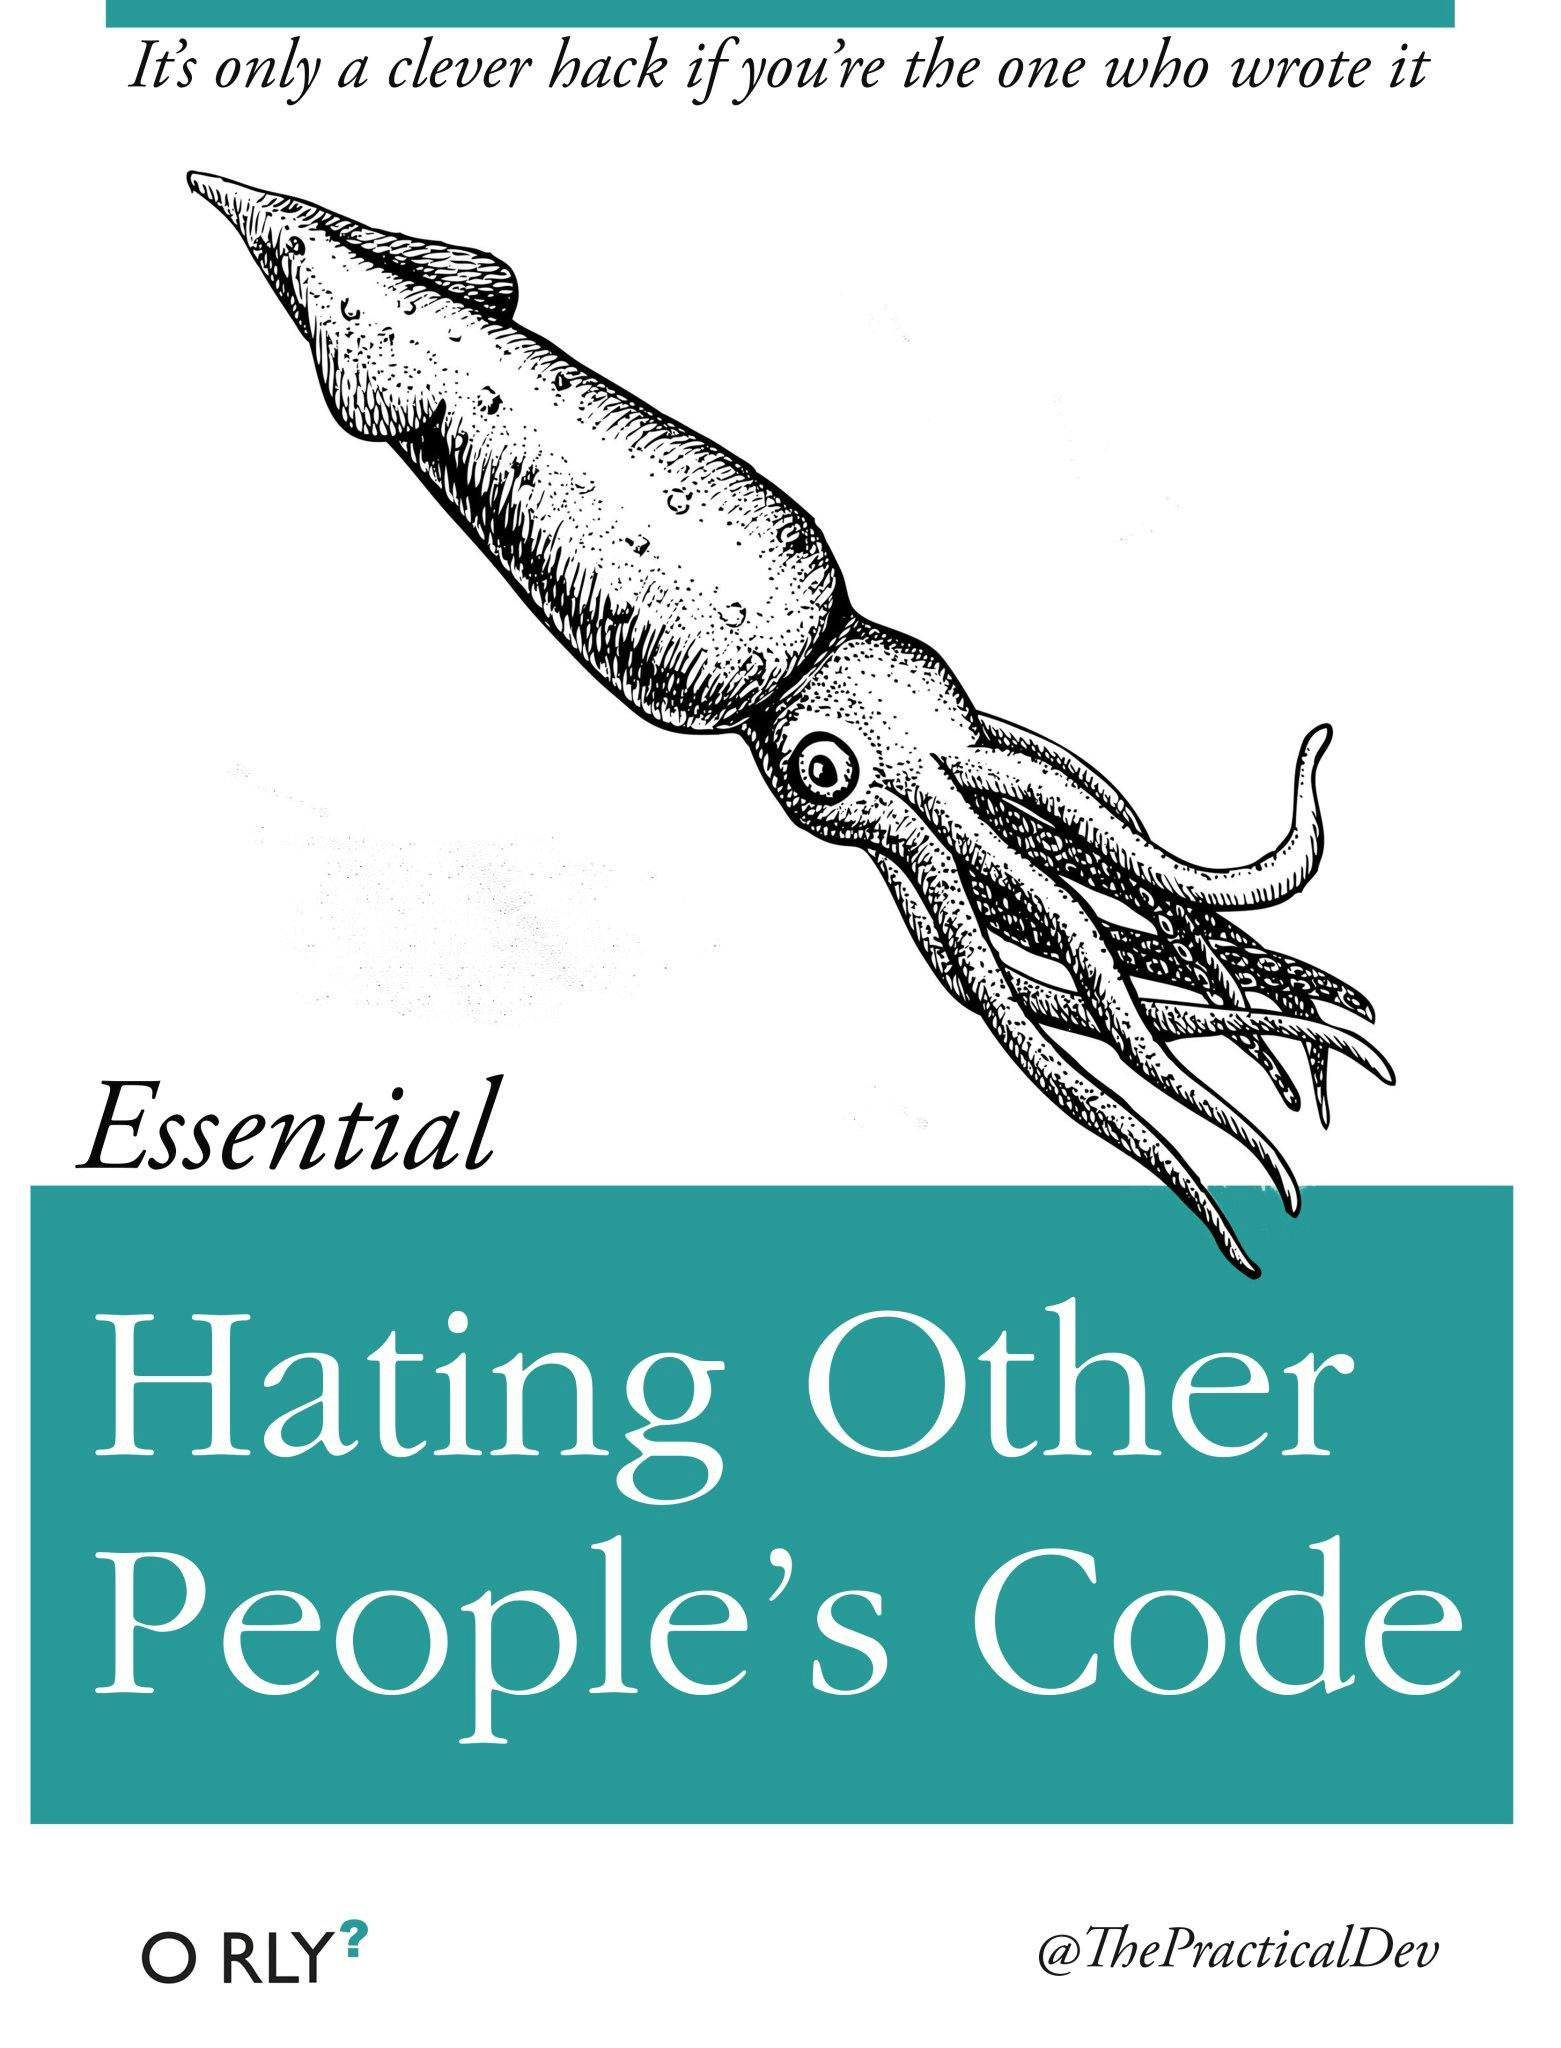 Hating Other People's Code | It's only a clever hack if you're the one who wrote it